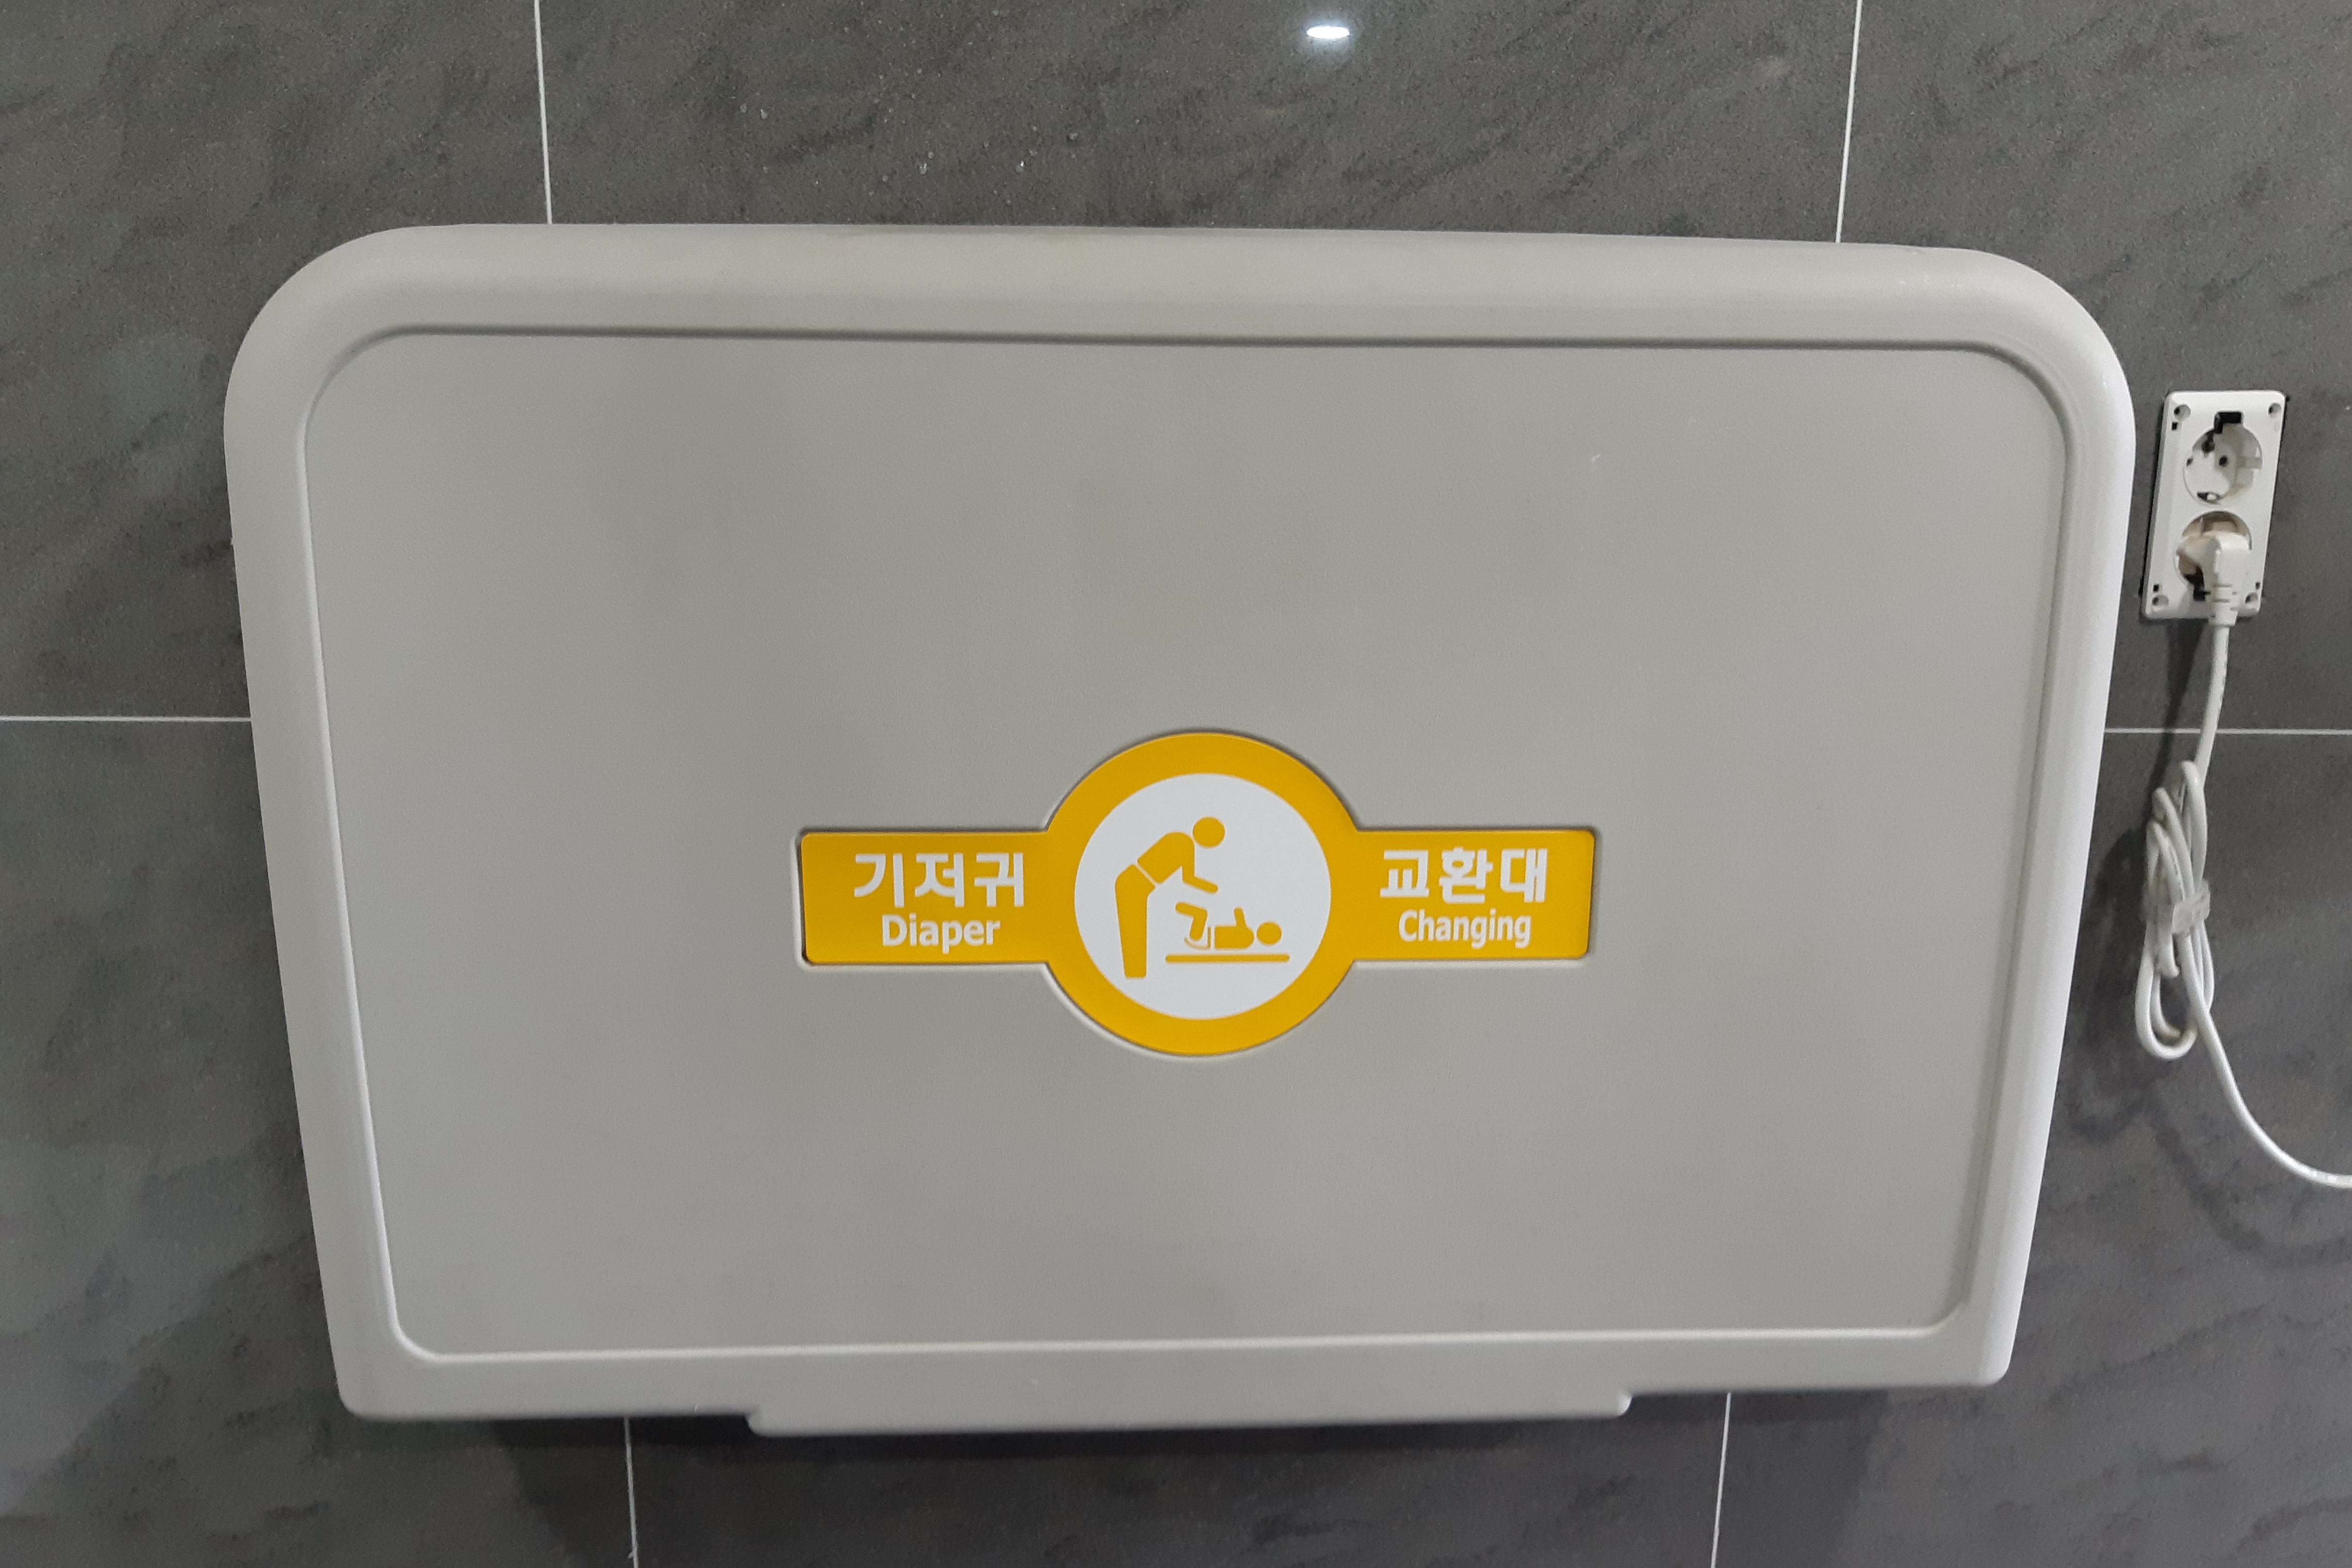 Children resting area0 : A diaper changing station installed in general restroom